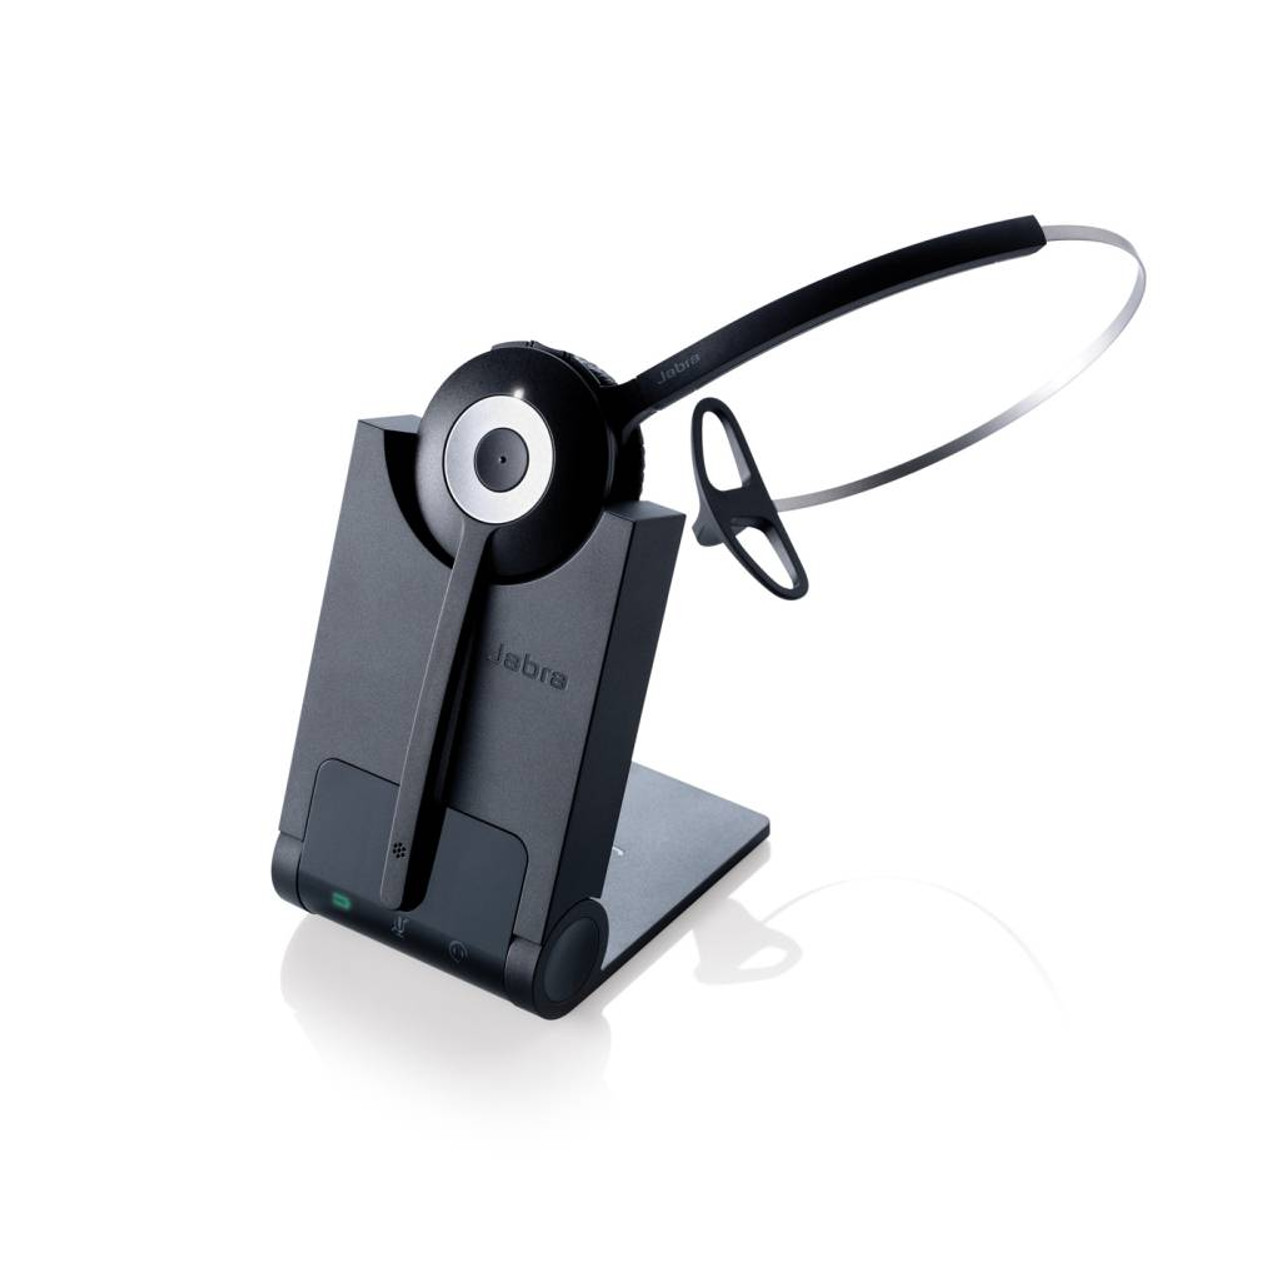 Wireless Headset for Digium D50 IP Phone PRO920